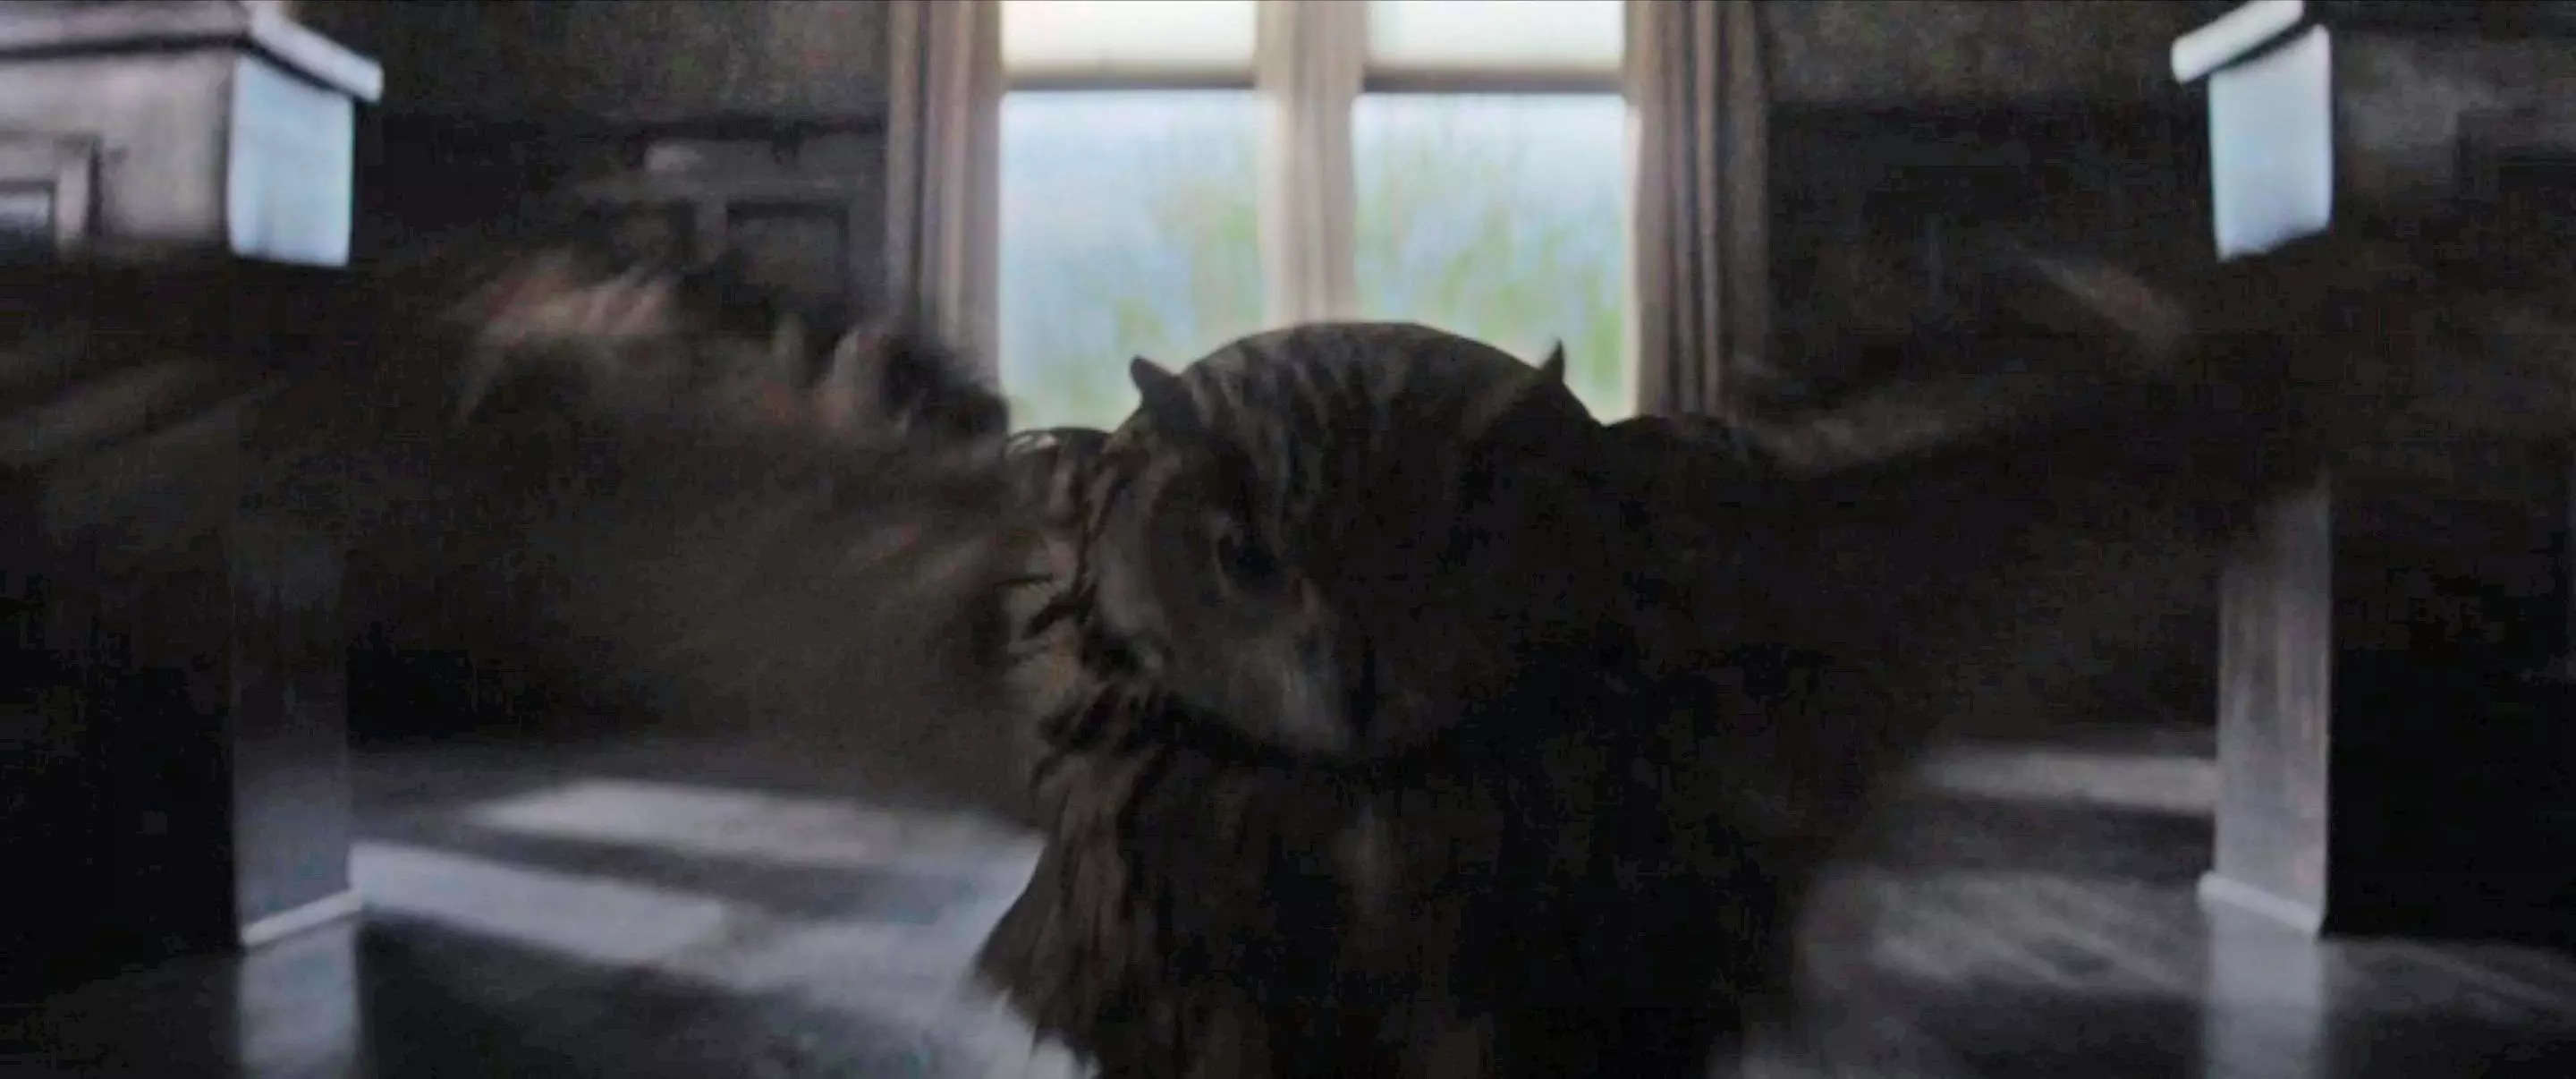 'Killers of the Flower Moon' cinematographer recalls how an owl provided the movie's 'magical moment' 